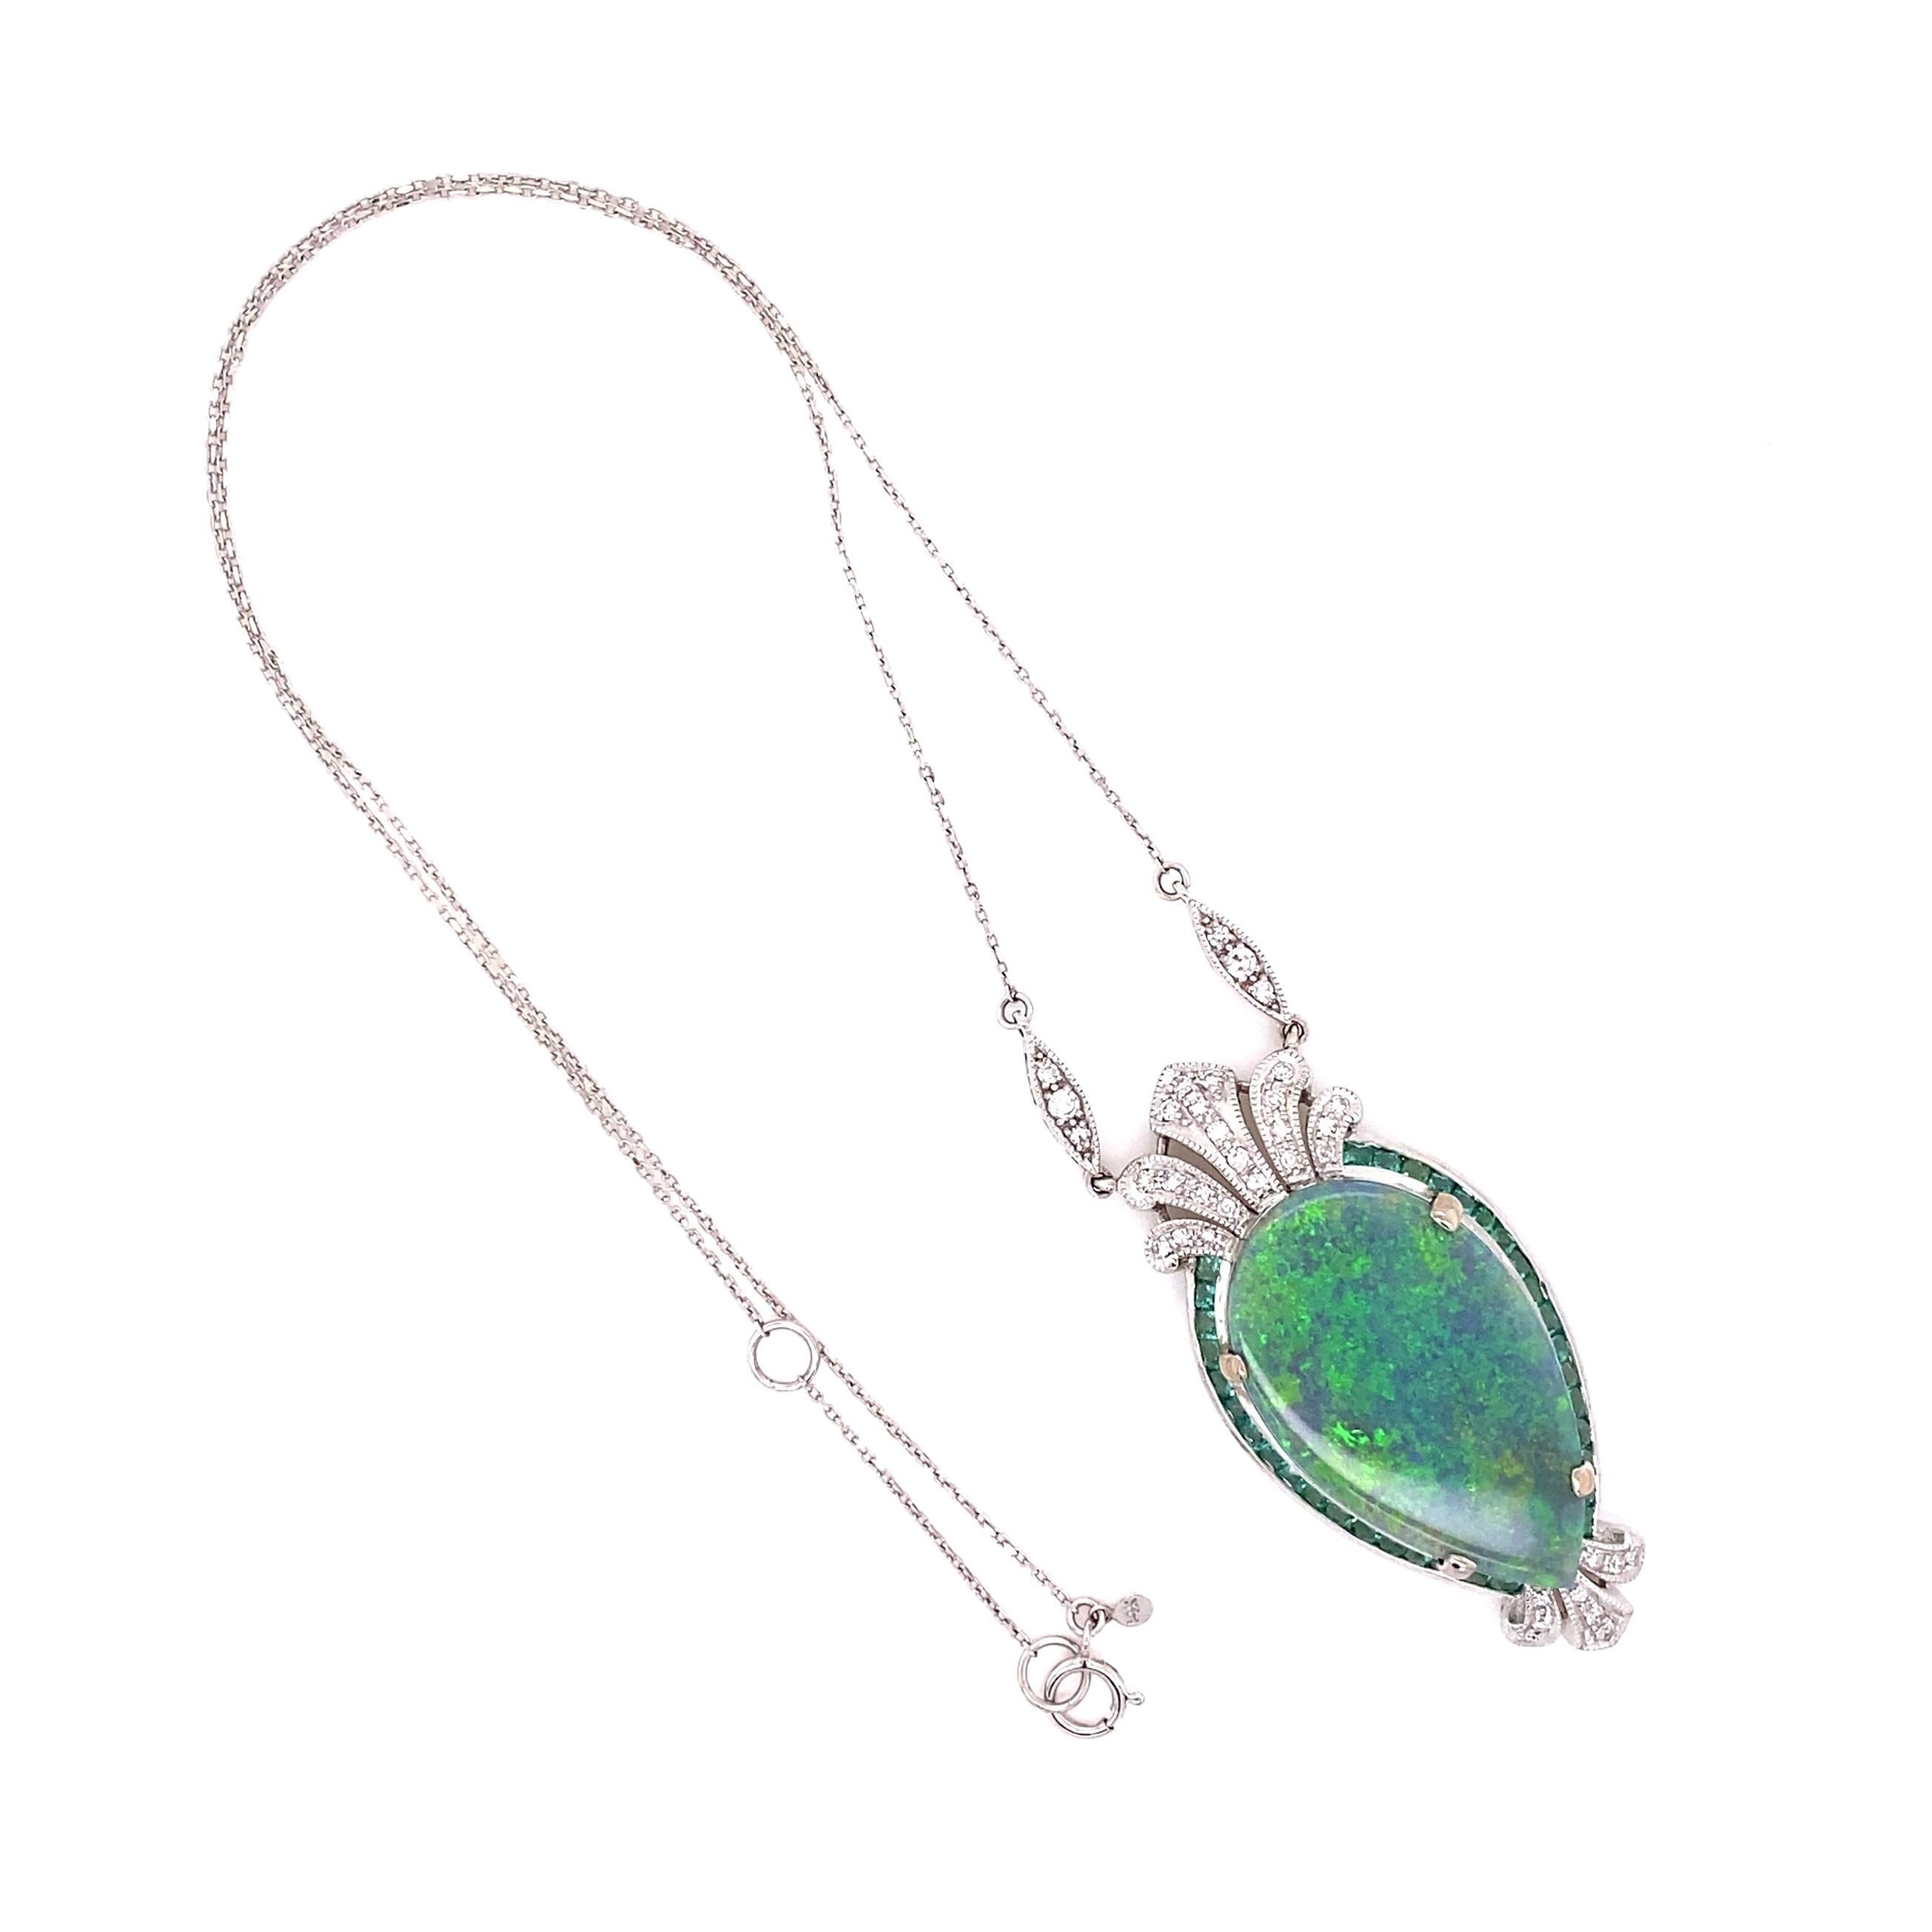 Simply Beautiful! Elegant and finely detailed House of Ming design with a Natural Australian Lightning Ridge Dark Gray Opal Pendant Necklace. Center Hand set with a securely nestled 16.15 Carat Dark Gray Opal surrounded by Emeralds weighing approx.